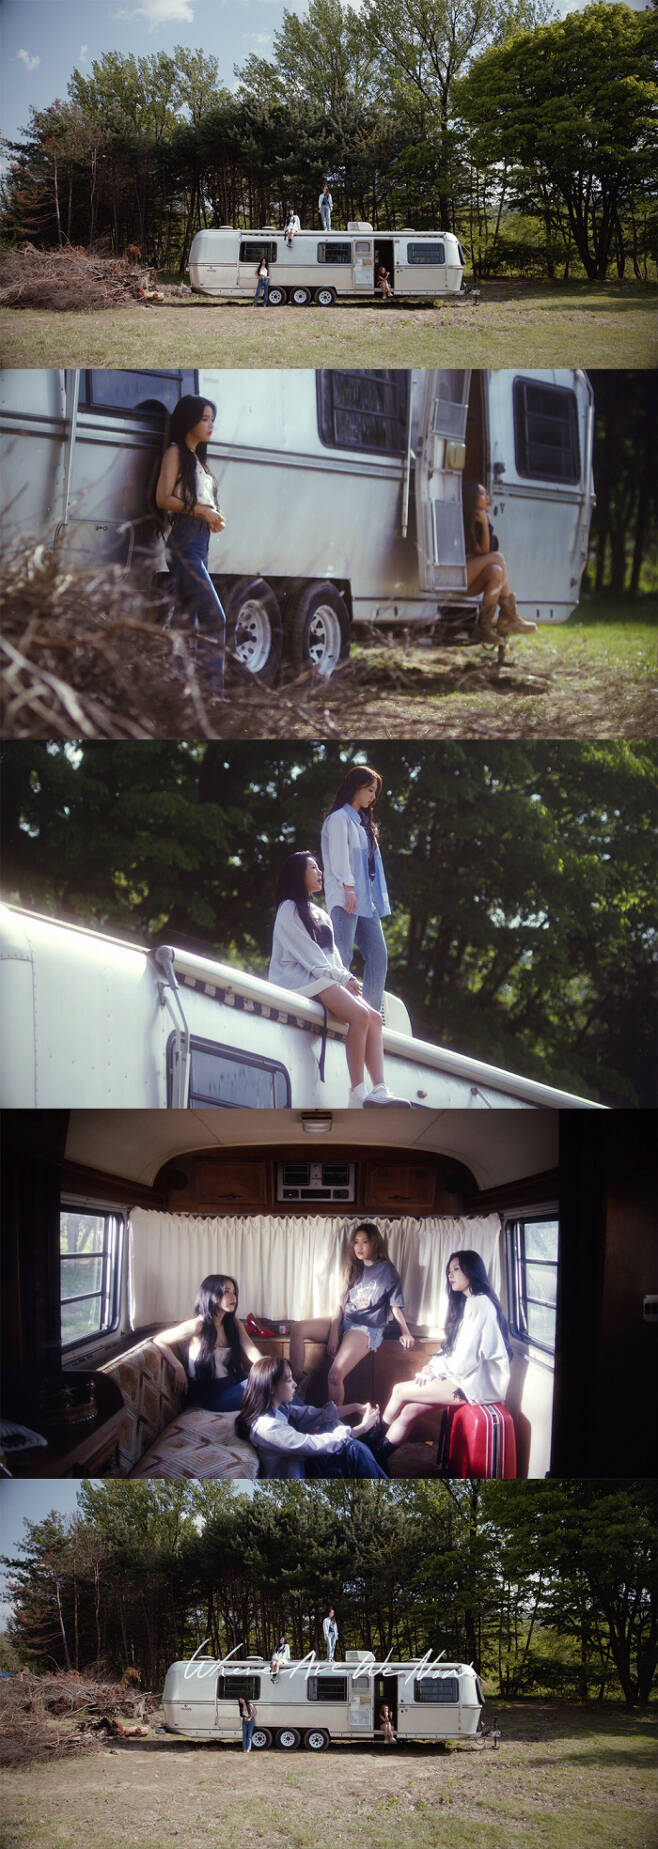 MAMAMOO, which first released the title song as a ballad after debut, released a new album Teaser video.MAMAMOO presented a Caddo version of the new Mini album WAW via the official YouTube channel at 0:00 today (27th).The video shows MAMAMOO posing in a forest caravan with warm sunshine.I feel the affection of the members who have been together for 7 years in a calm and comfortable atmosphere.Here, along with the song We Two, who dreamed like you here in this beautiful star, the sound source of the title song Where Are We Now is released, and the rich chords of Wheein and Hwasa capture my ears.As such, MAMAMOO will launch the new Mini album WAW and open the door to the 2021 Where Are We (WAW) project in earnest.In particular, MAMAMOO selected the ballad genre Where Are We Now as its title song for the first time after debut. It is a sign of confidence in MAMAMOO vocals.Prior to this, MAMAMOO released a concept photo that perfectly captures 180 degrees of charm, including purity and charm, and predicted a different appearance to show with a new Mini album WAW.The new Mini album WAW is an album that honestly captures the frank feelings and thoughts of MAMAMOOs seven years of running without hesitation after debut.With the release of the album, summer concerts and documentary releases are focused on the activities of MAMAMOO, which is hot in the music industry.On the other hand, MAMAMOO will release a new Mini album WAW on the 2nd of next month and comeback.